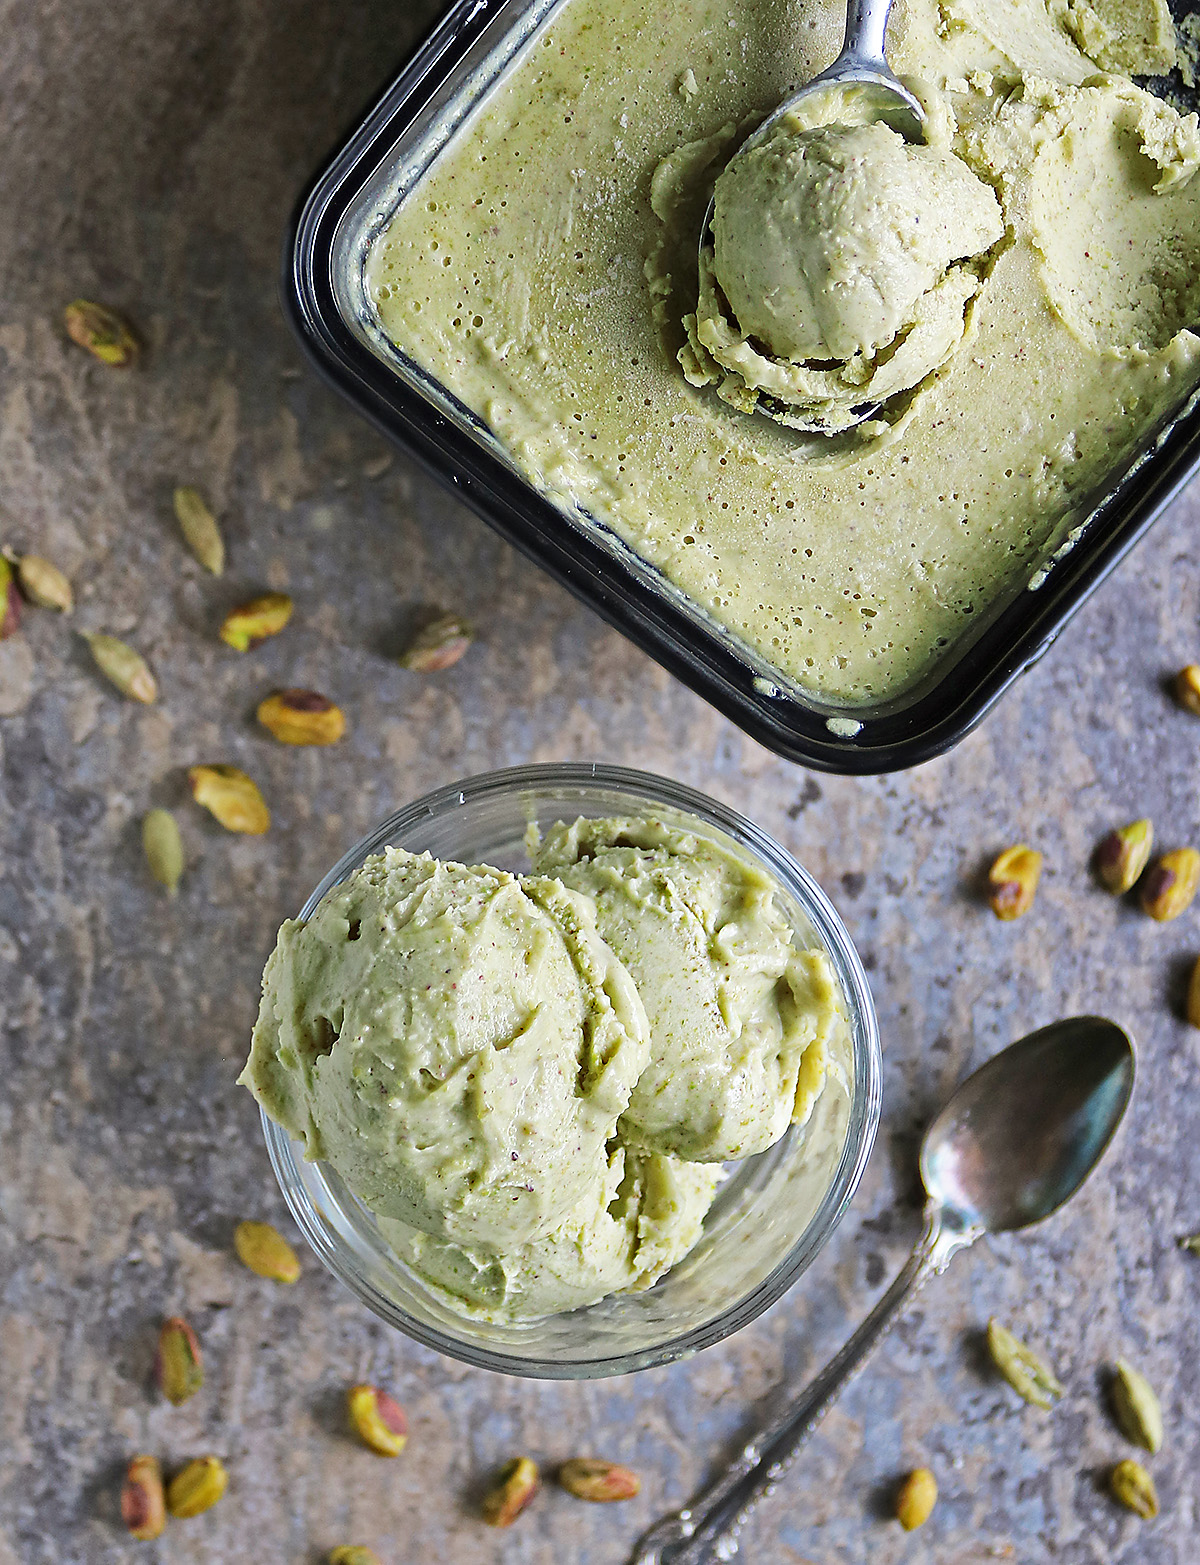 Pistachio ice cream made with a whole cup of ground up pistachios